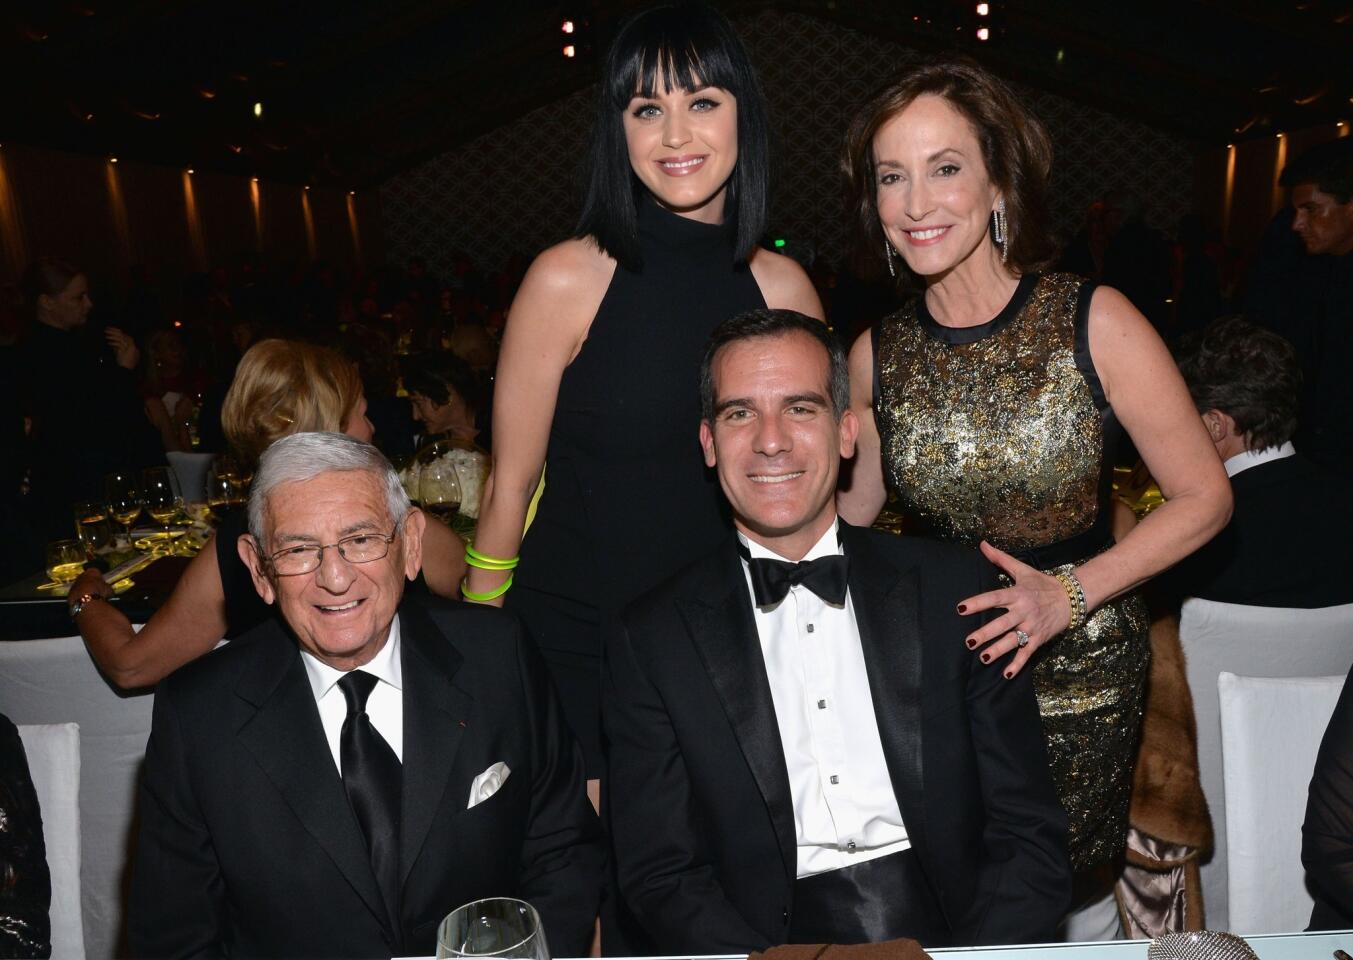 MOCA Gala Chair Eli Broad, singer Katy Perry, Mayor of Los Angeles Eric Garcetti and MOCA Gala Chair Lilly Tartikoff Karatz attend MOCA's 35th Anniversary Gala presented by Louis Vuitton at The Geffen Contemporary at MOCA in Los Angeles.